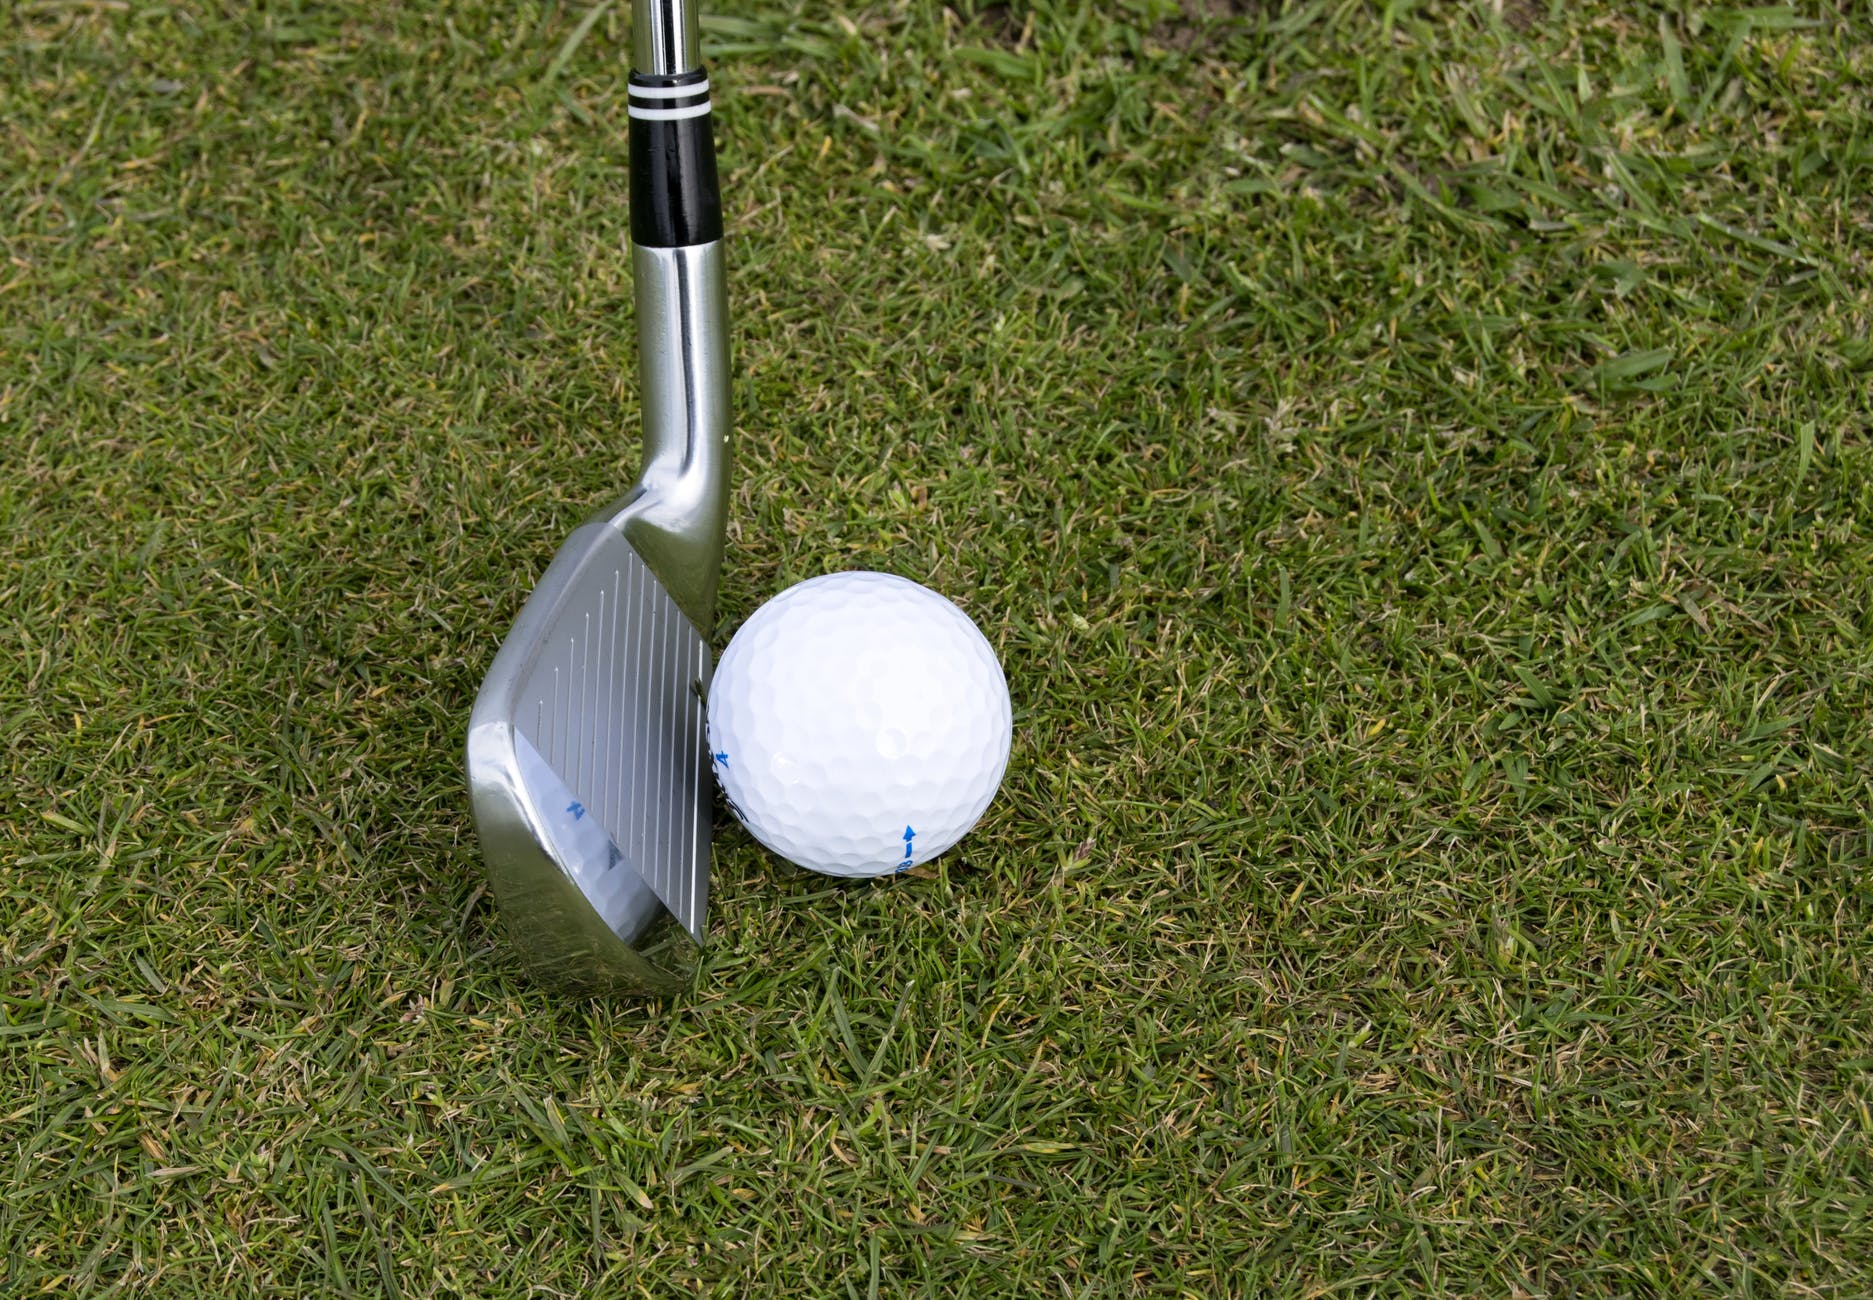 How Far Should You Hit a 7 Iron?